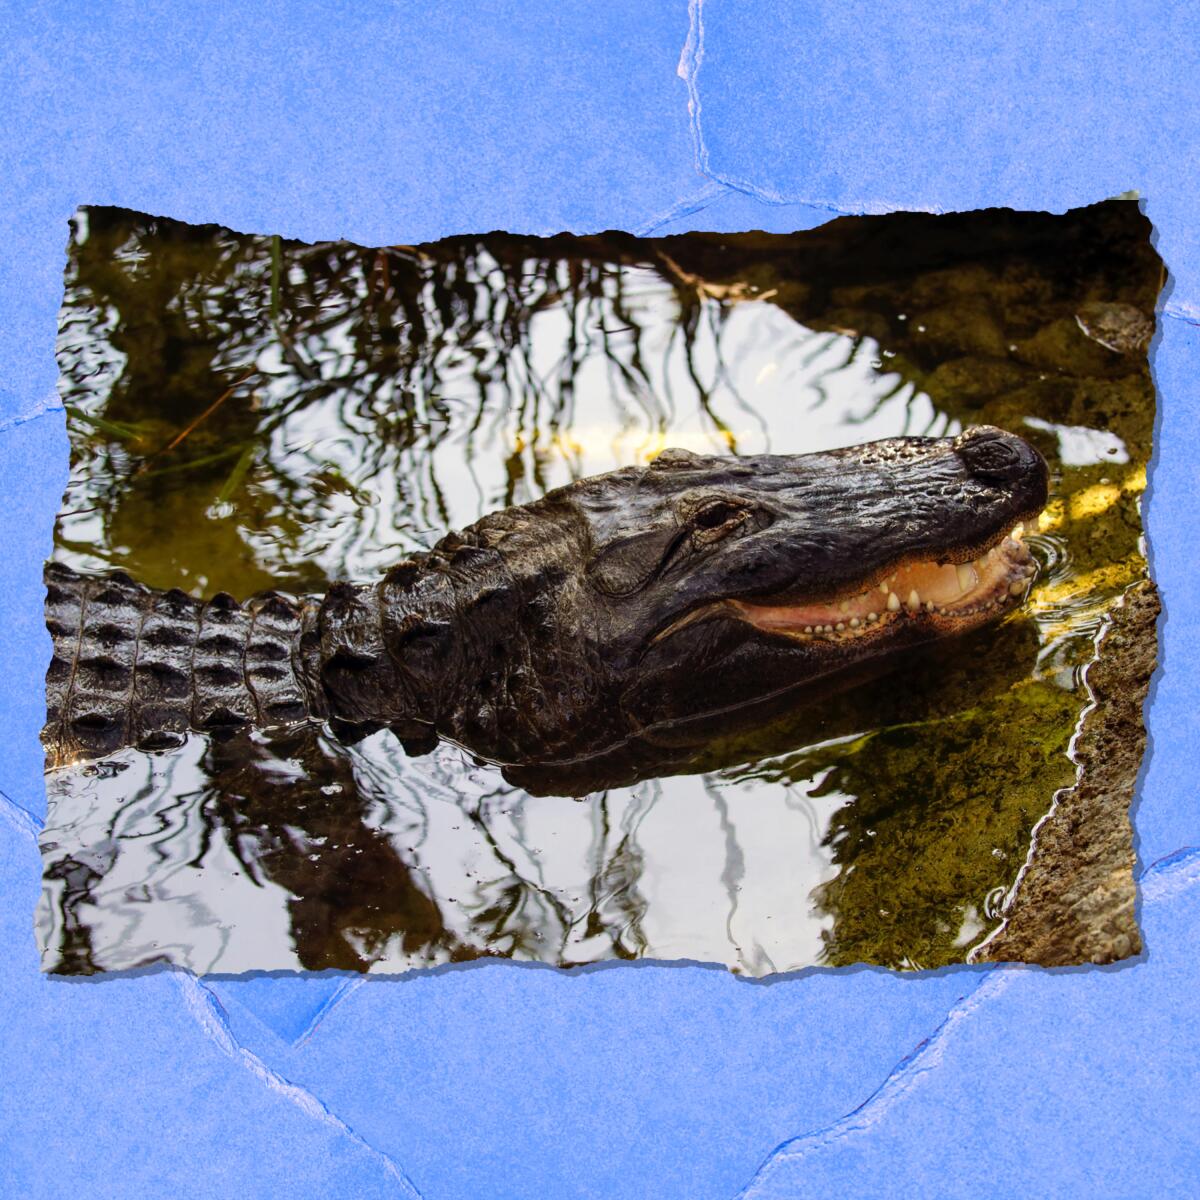 Closeup of an adult alligator with its mouth slightly open.